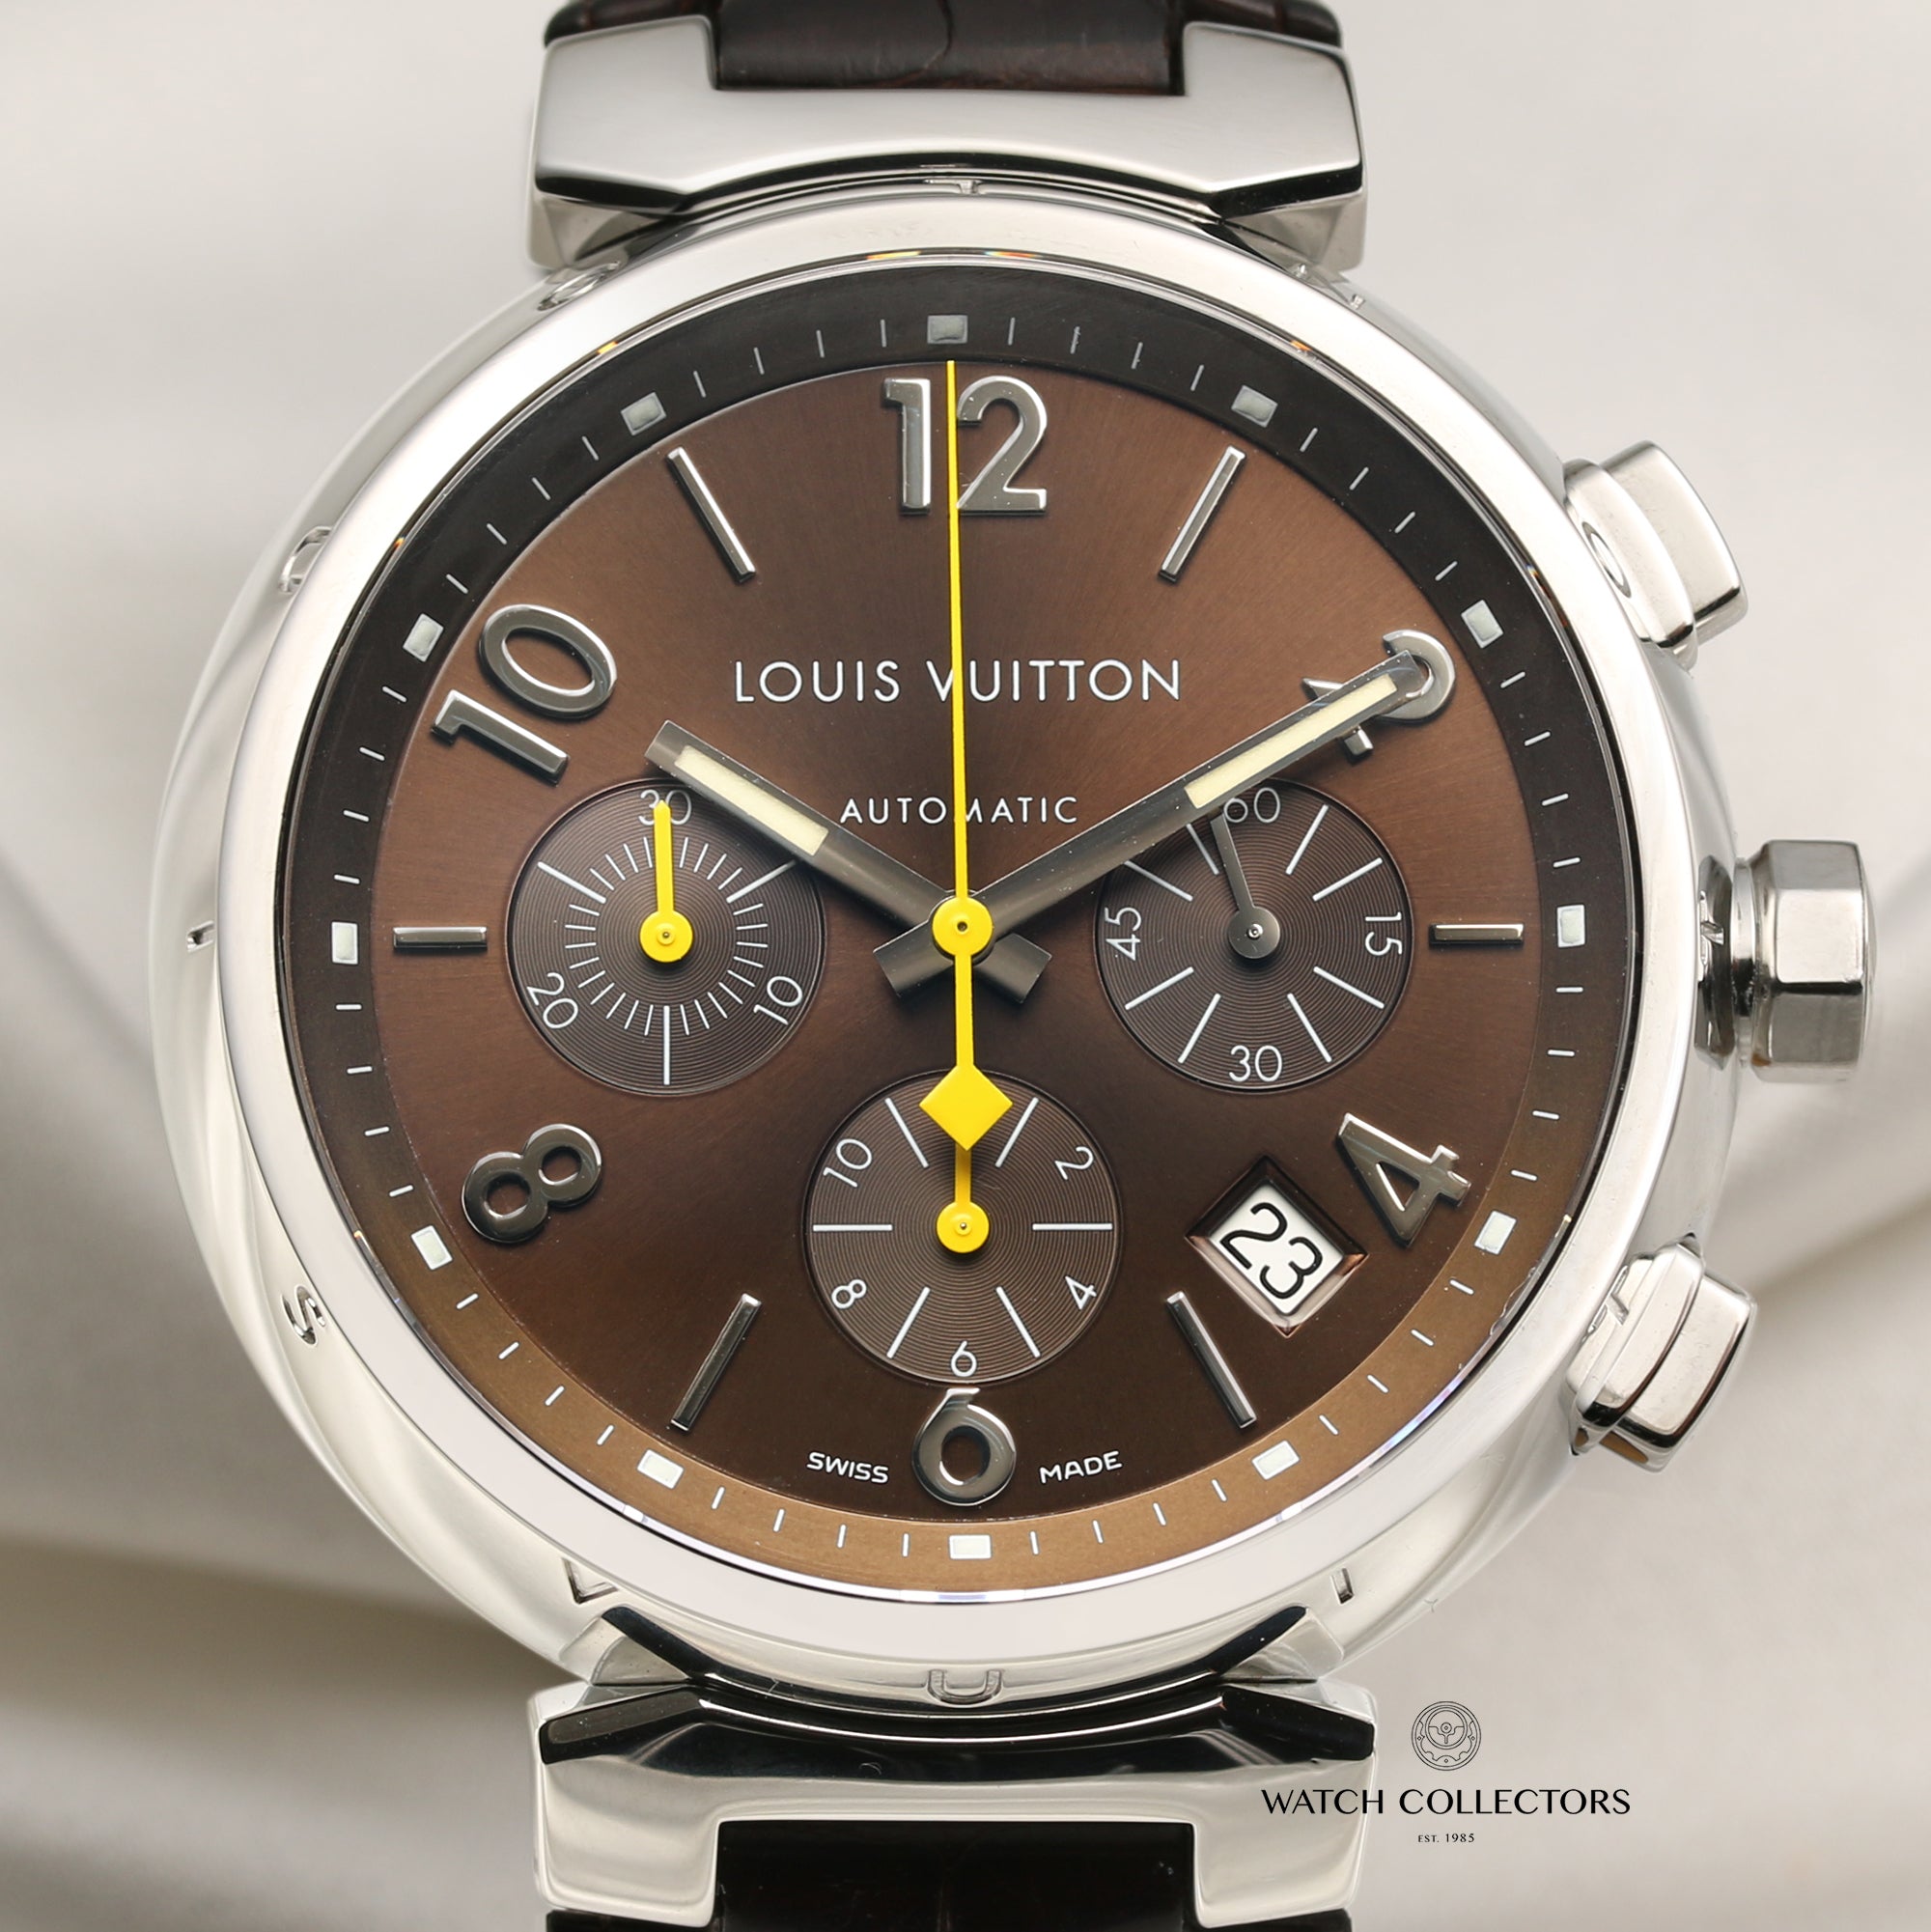 Louis Vuitton Tambour Chronograph Stainless Steel Watch Q1121